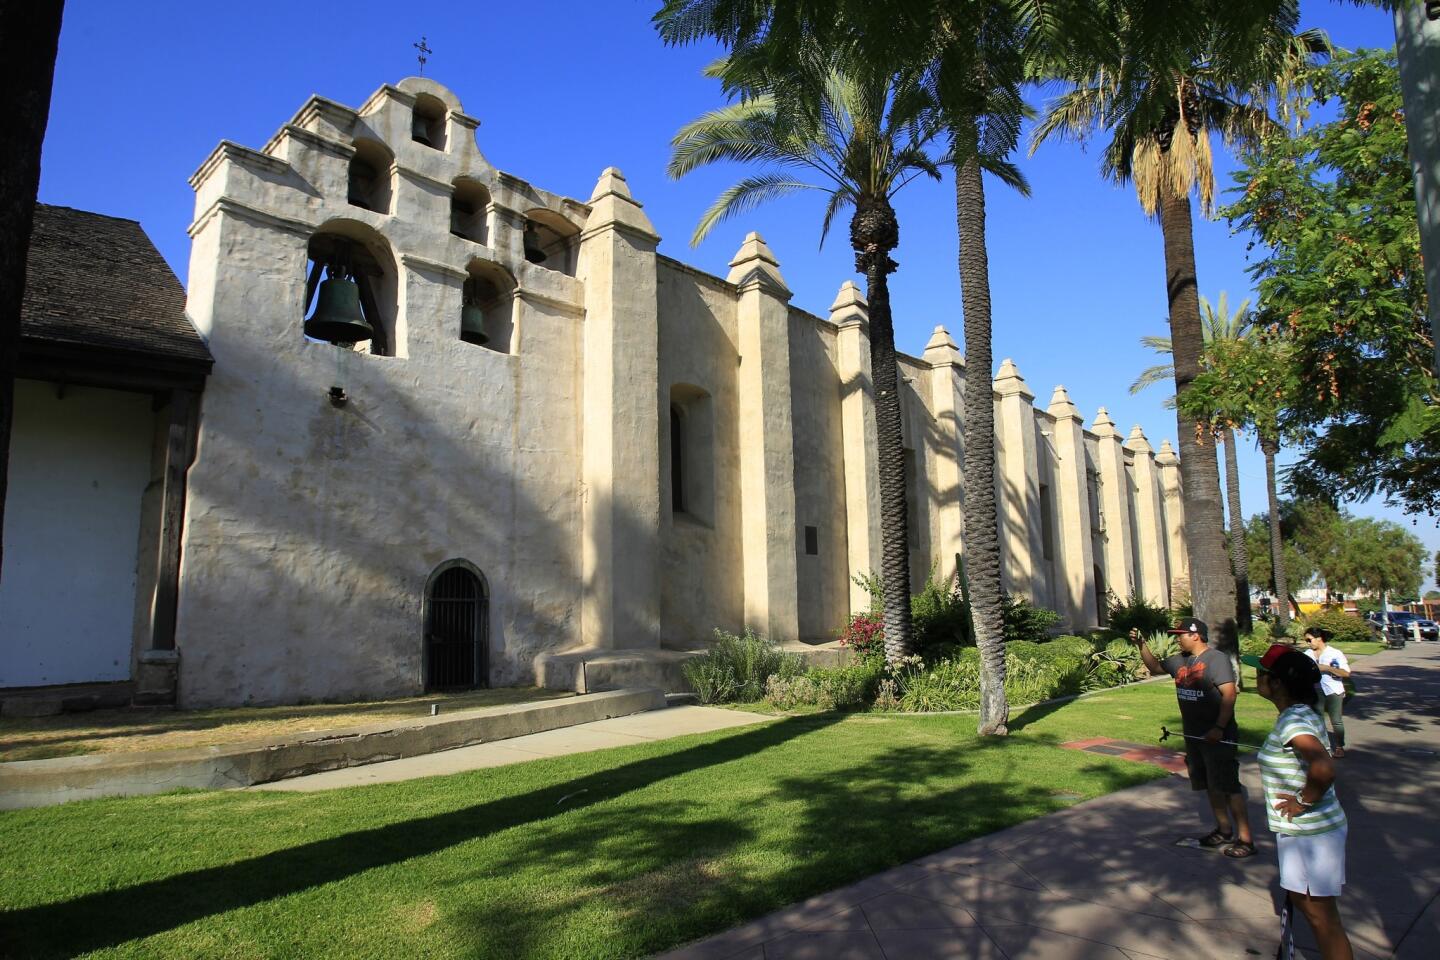 An exterior view of the San Gabriel Mission.